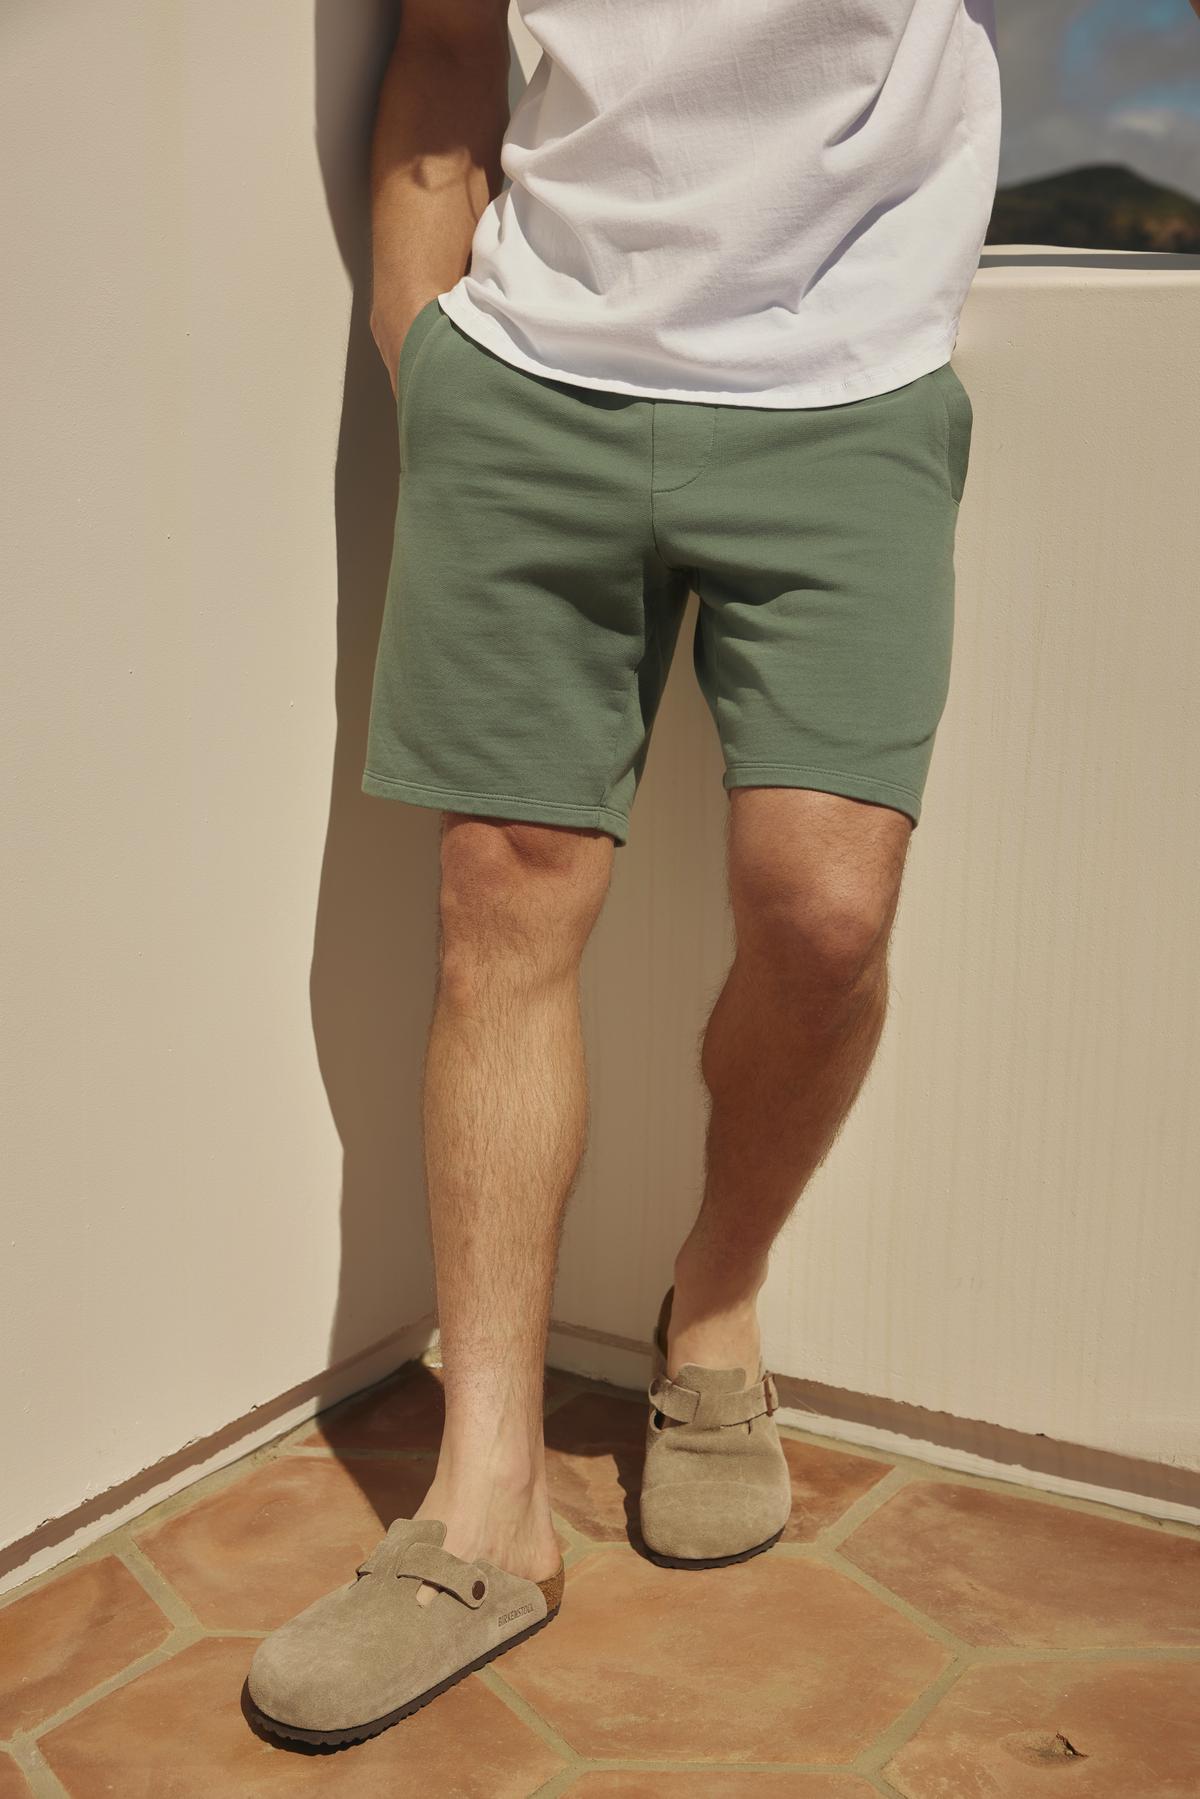 Man standing on a tiled patio wearing Velvet by Graham & Spencer's BECKETT SHORTs, a white t-shirt, and gray loafers, facing a sunlit wall.-36753585766593